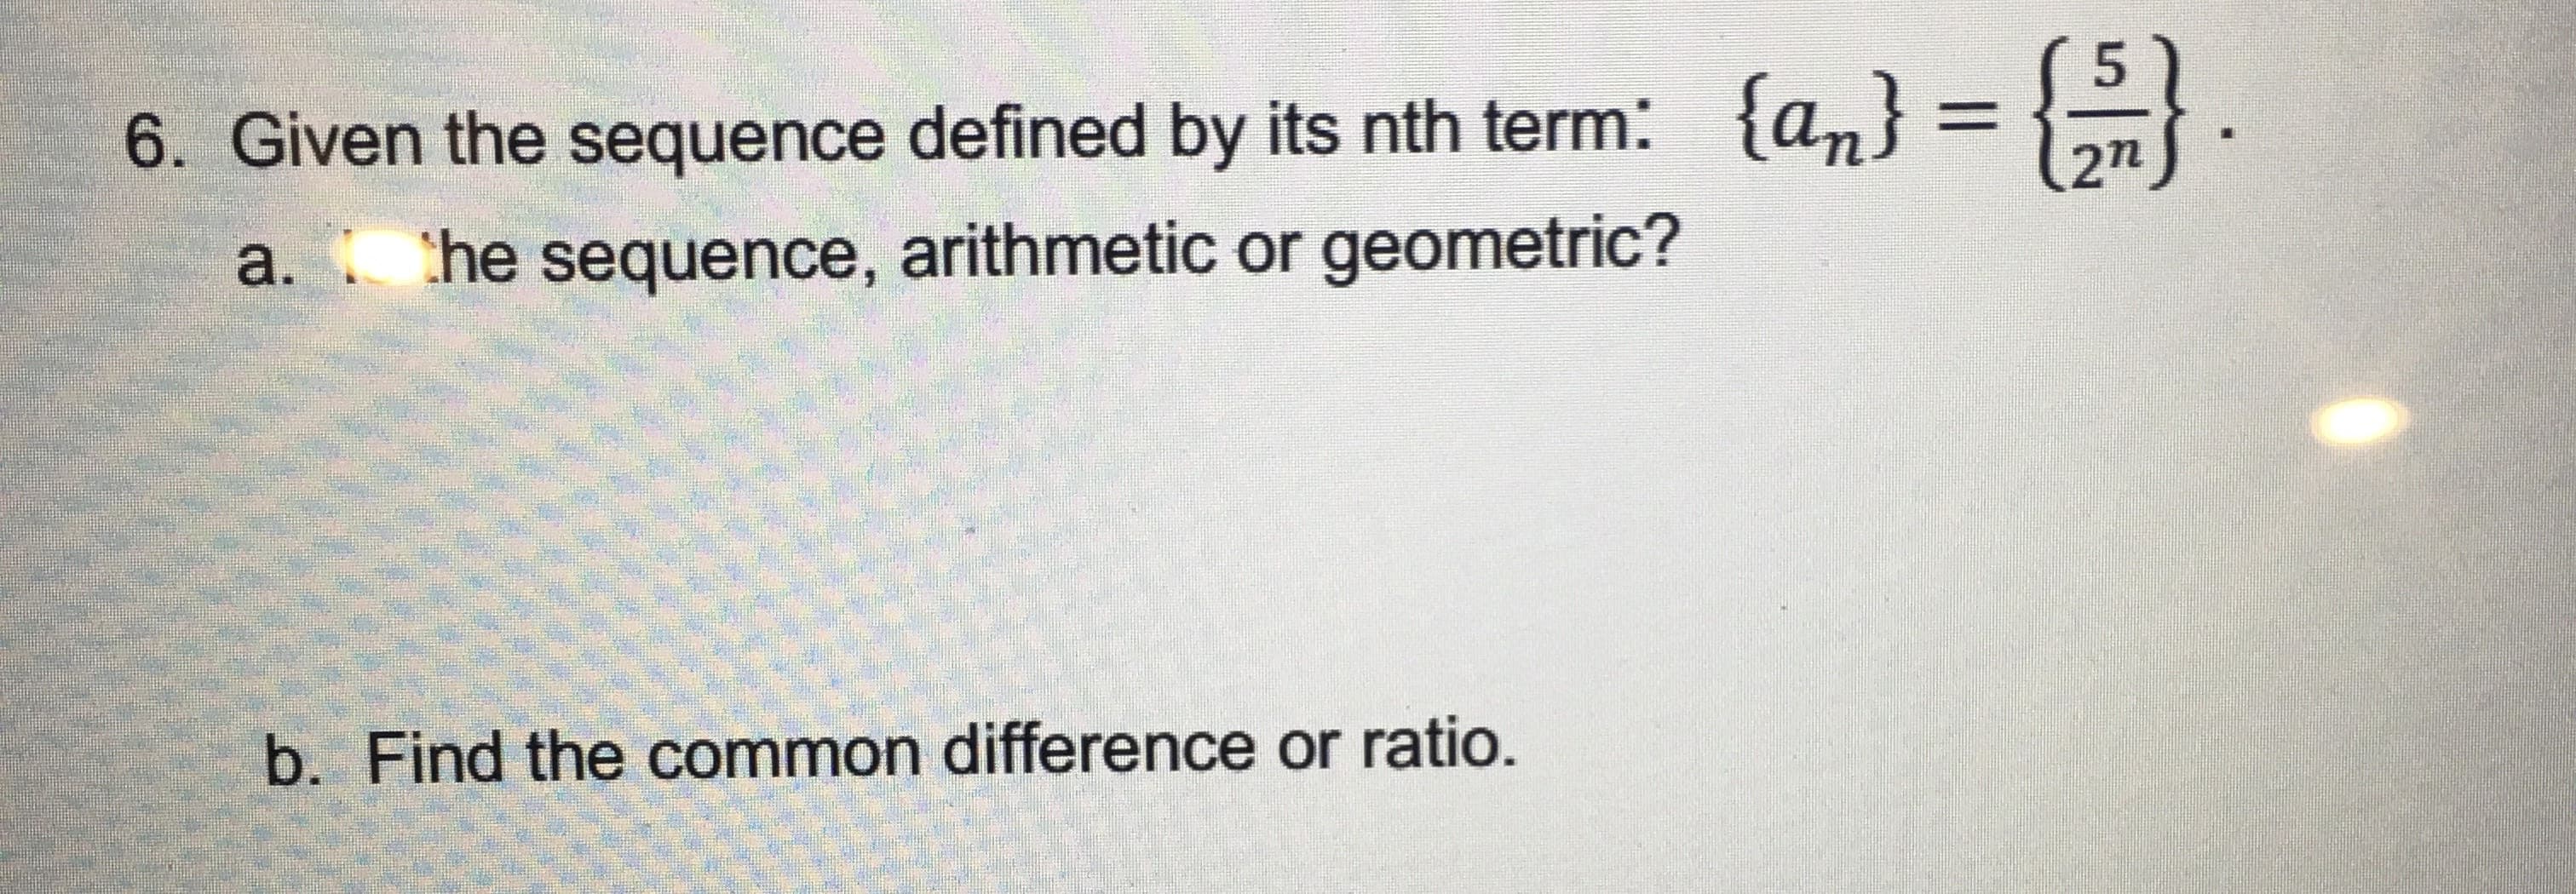 %3|
6. Given the sequence defined by its nth term: {an} = {}
a. he sequence, arithmetic or geometric?
b. Find the common difference or ratio.
